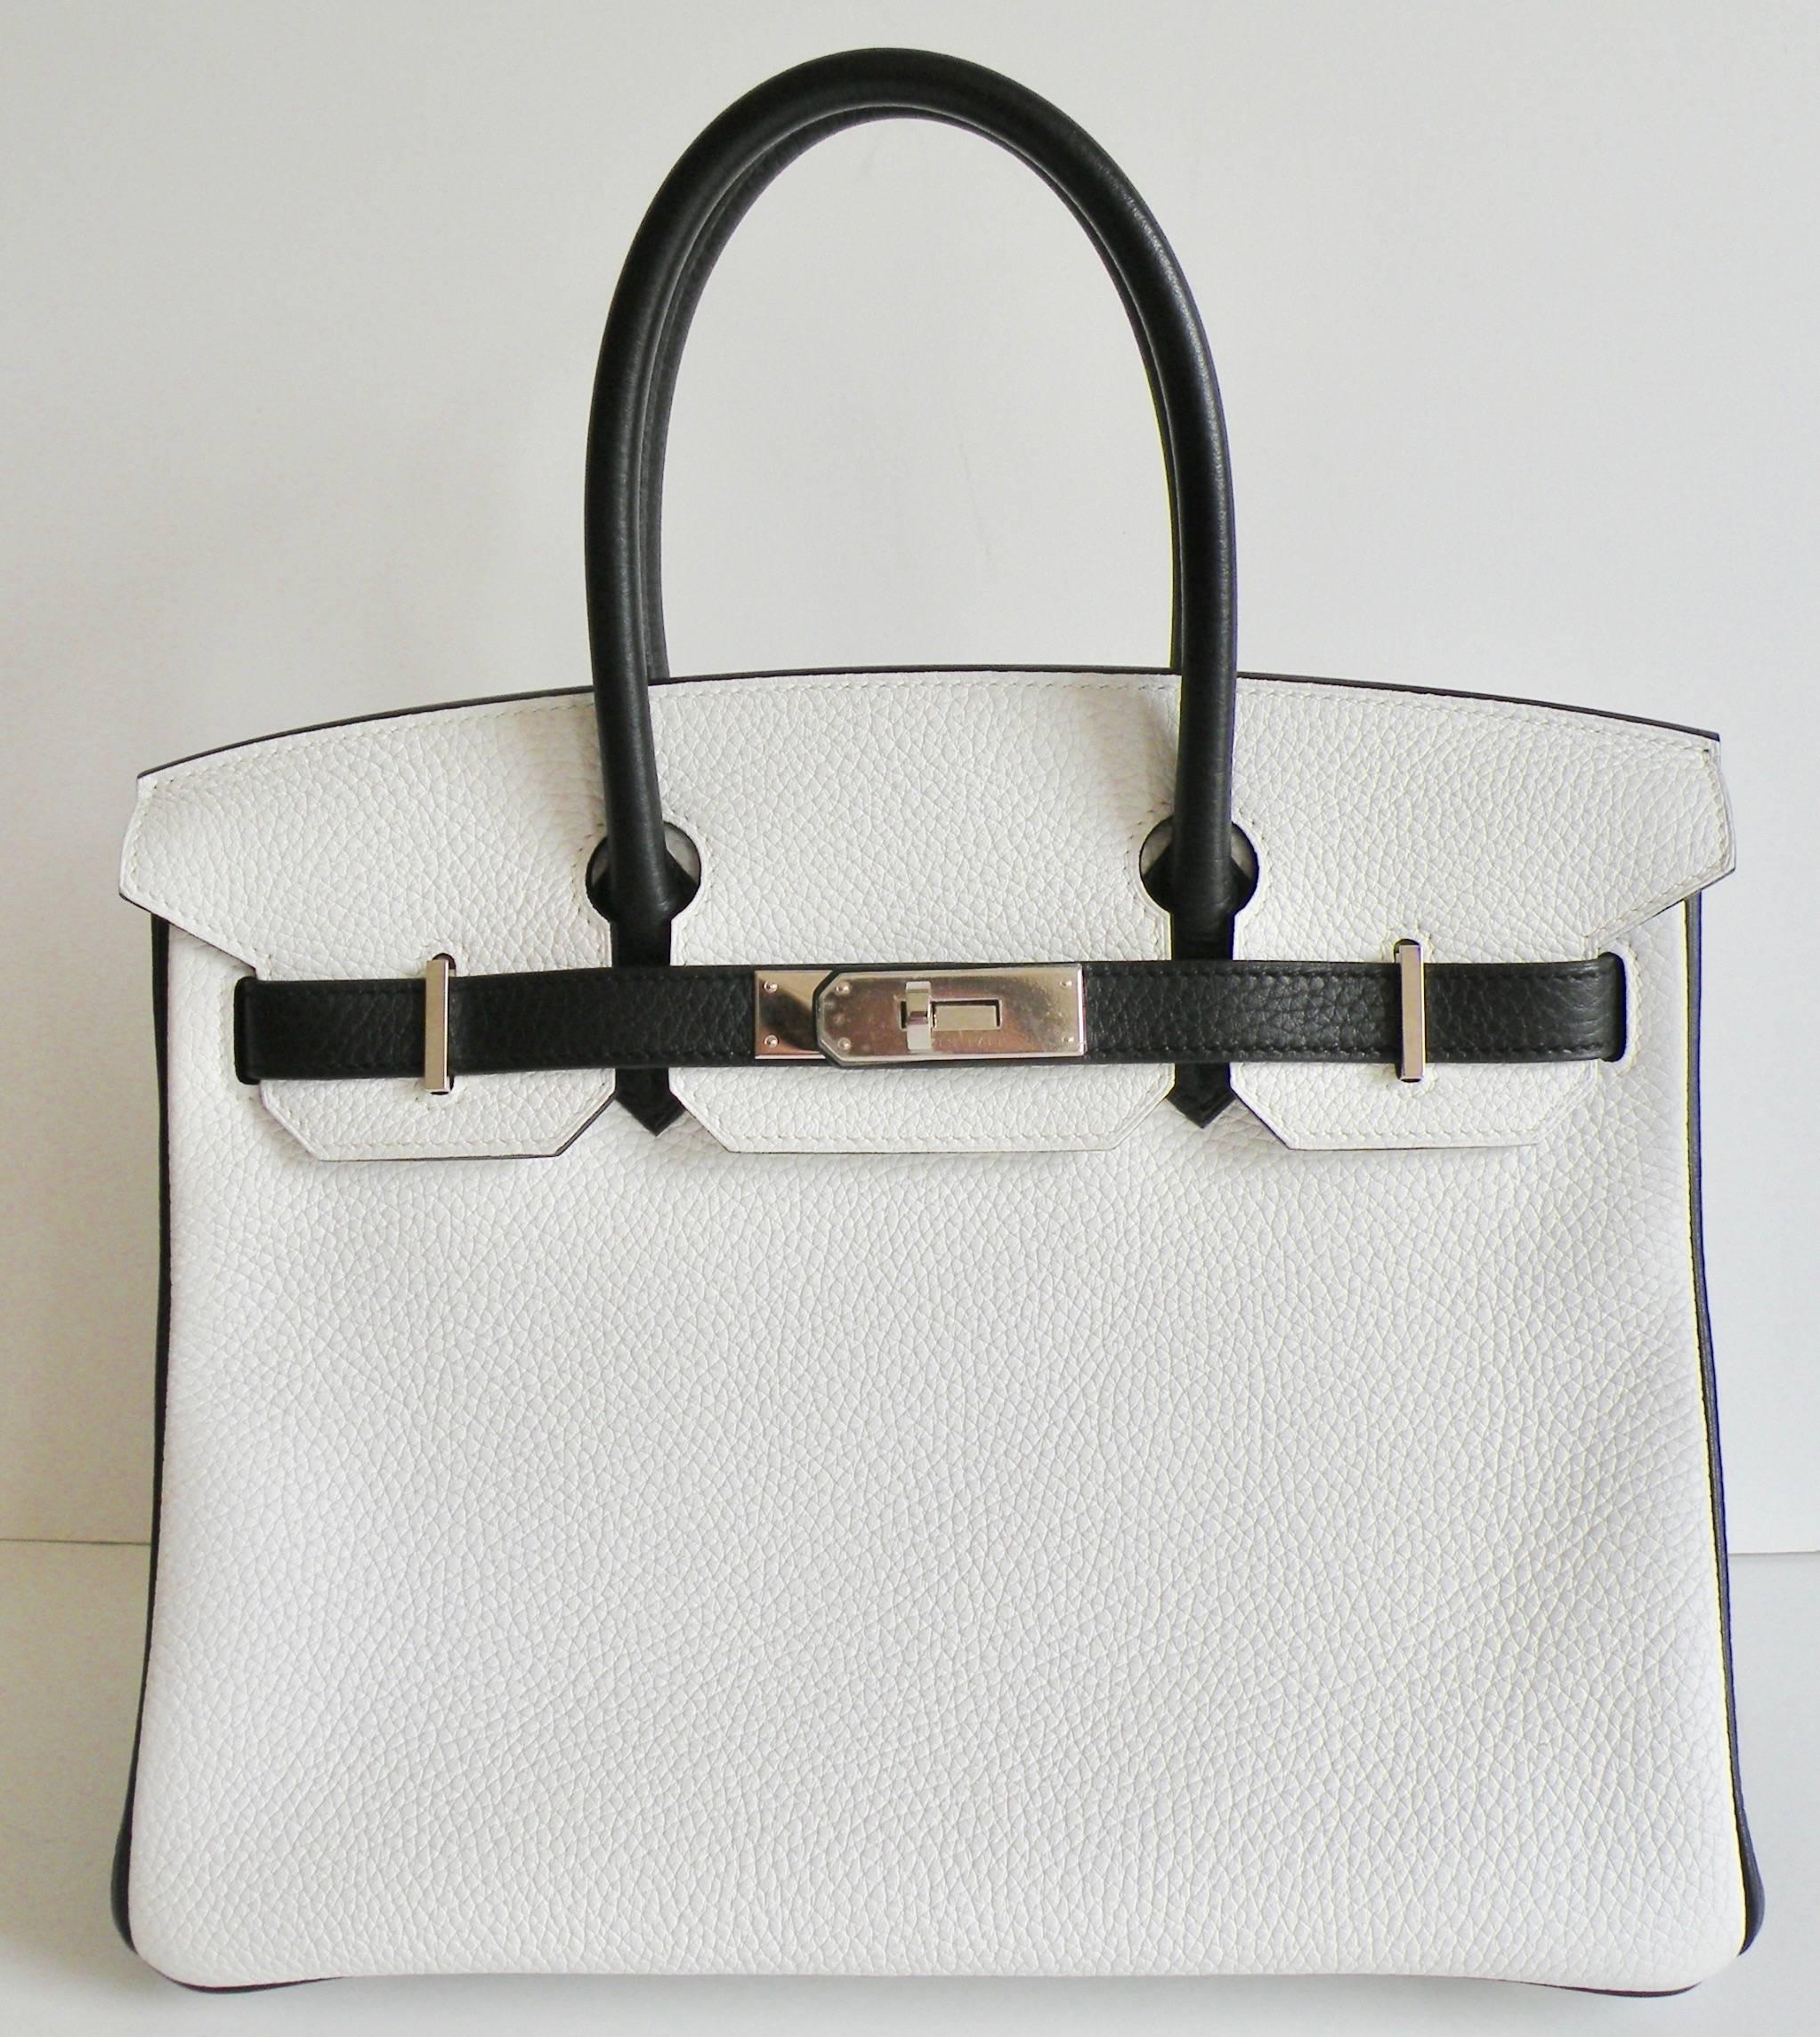 Hermes 30cm Birkin
Special Order Done in Stunning Black and White!
Palladium Hardware
Stamp X
Such a classic bag.
Complete Head Turner! You will not see any of these exact bags, as this was specially ordered, took almost 1 year to come in.
Make a